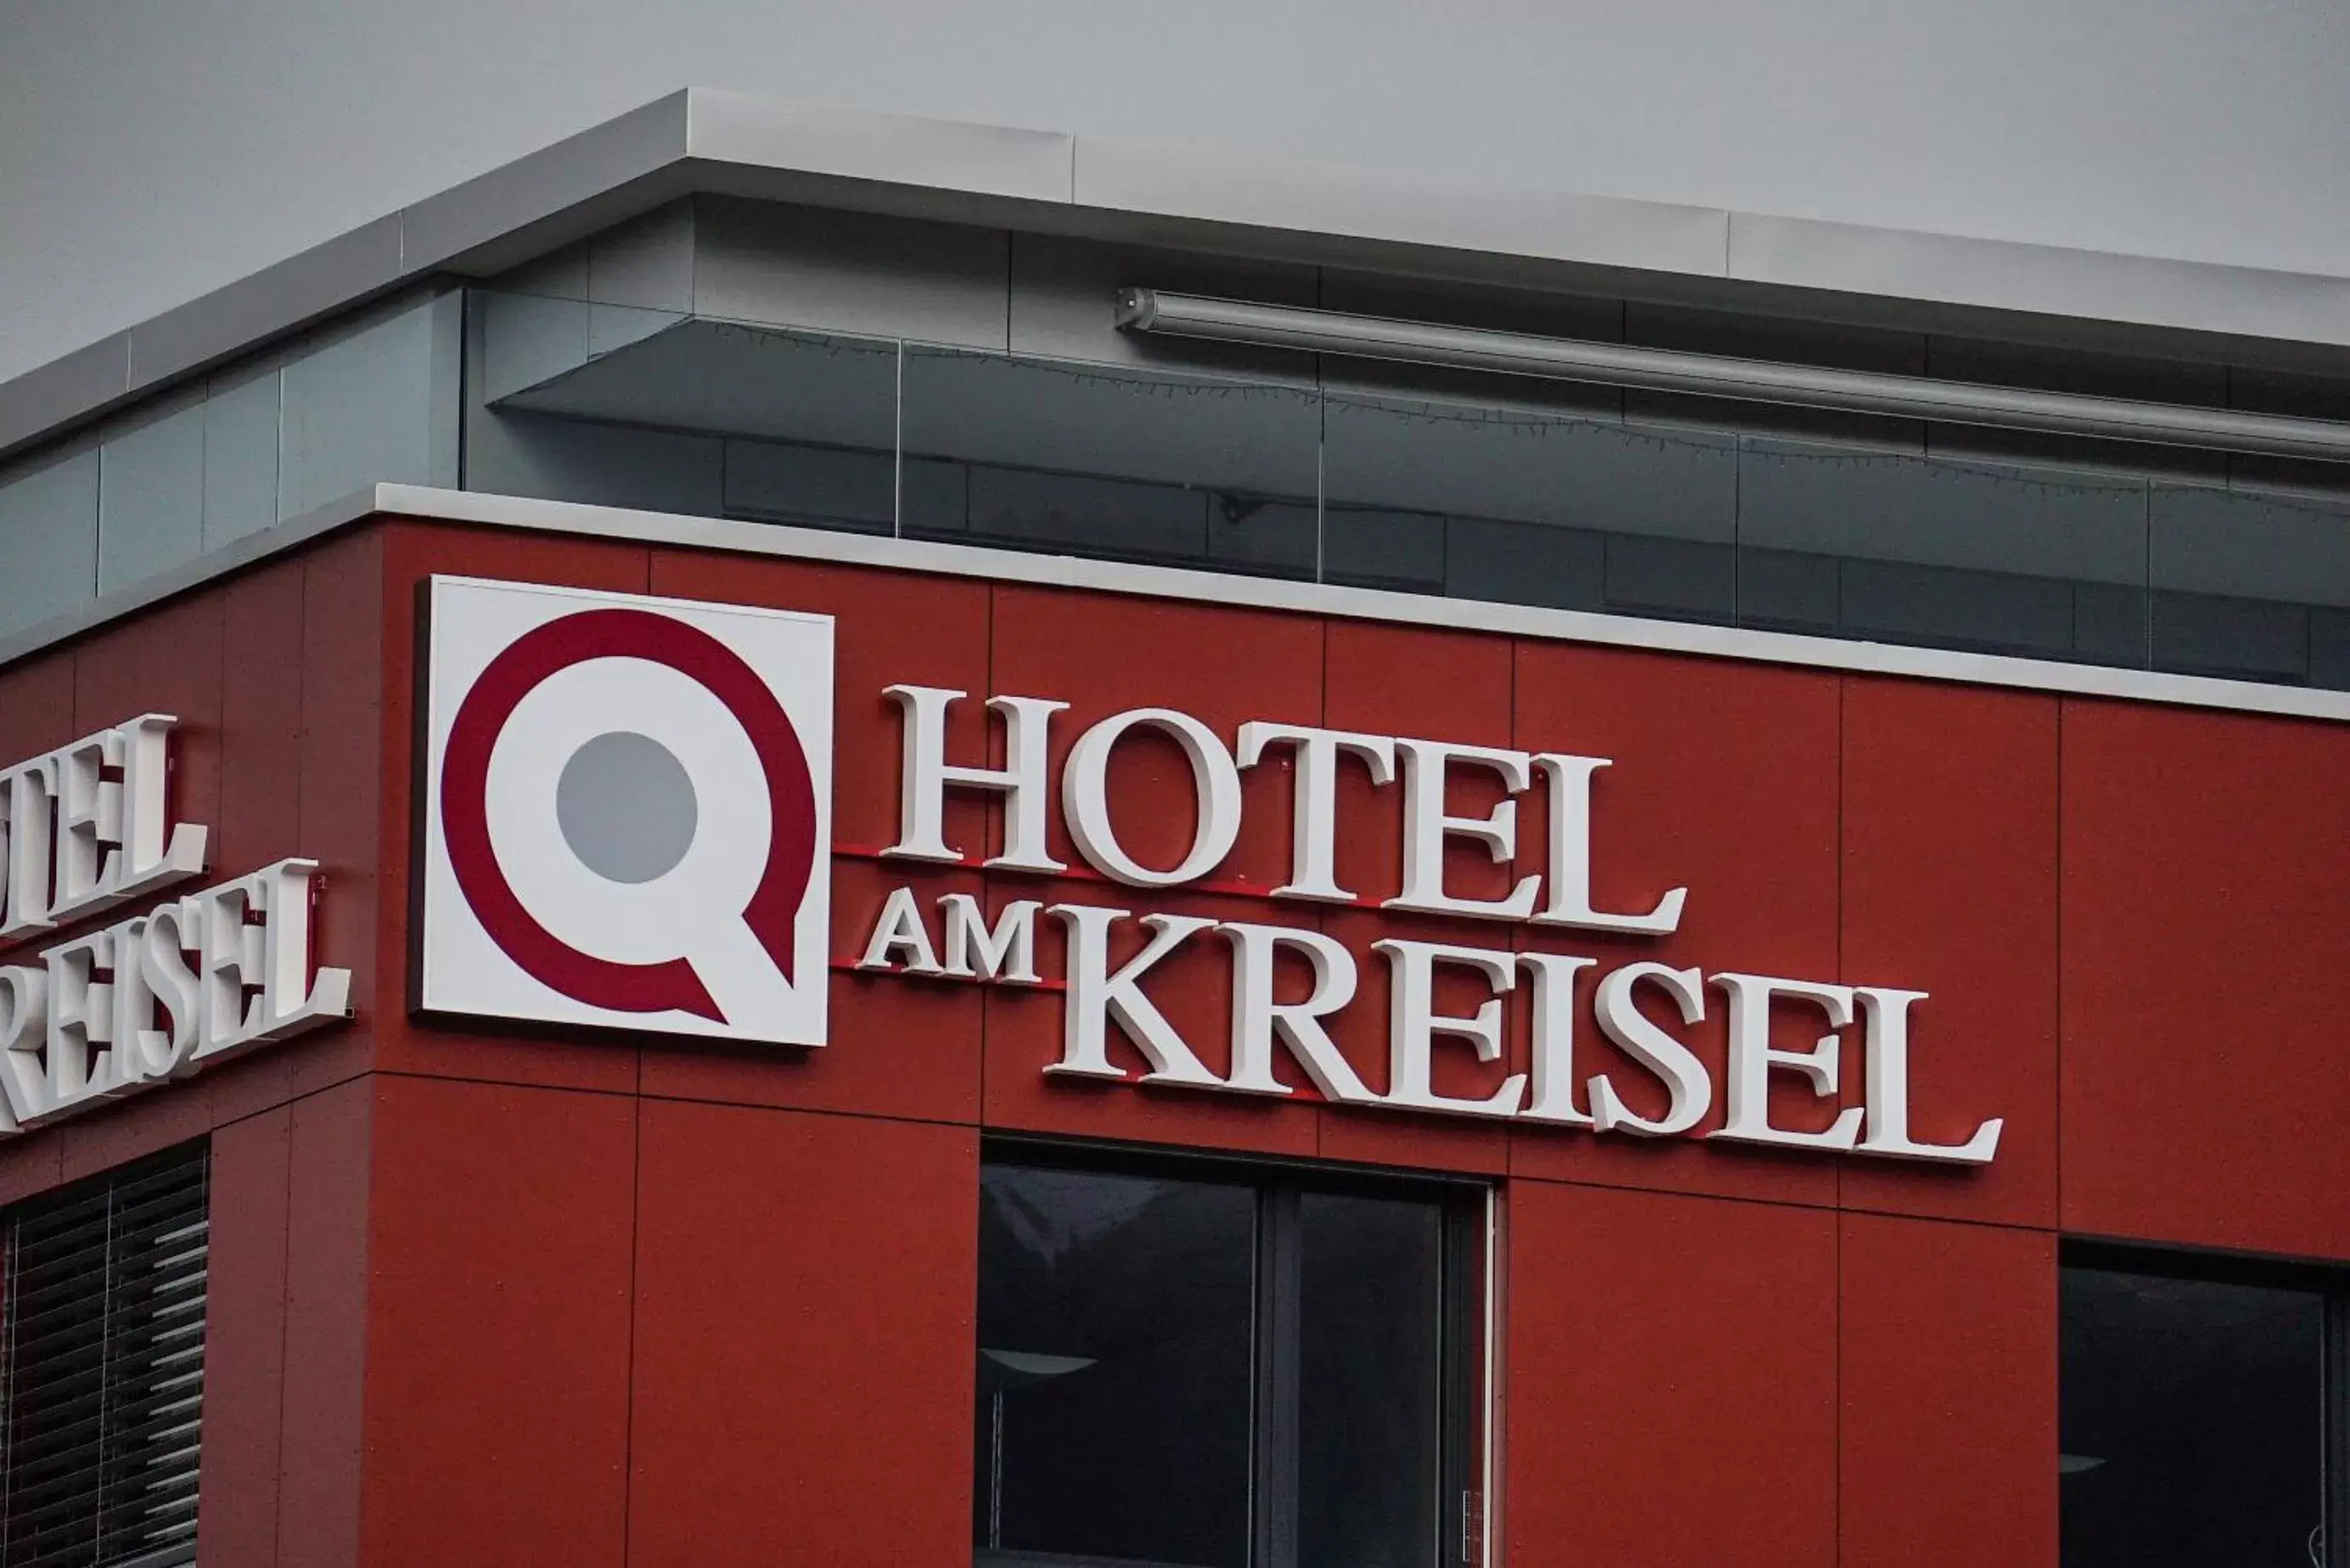 Property logo or sign in Hotel am Kreisel: Self-Service Check-In Hotel